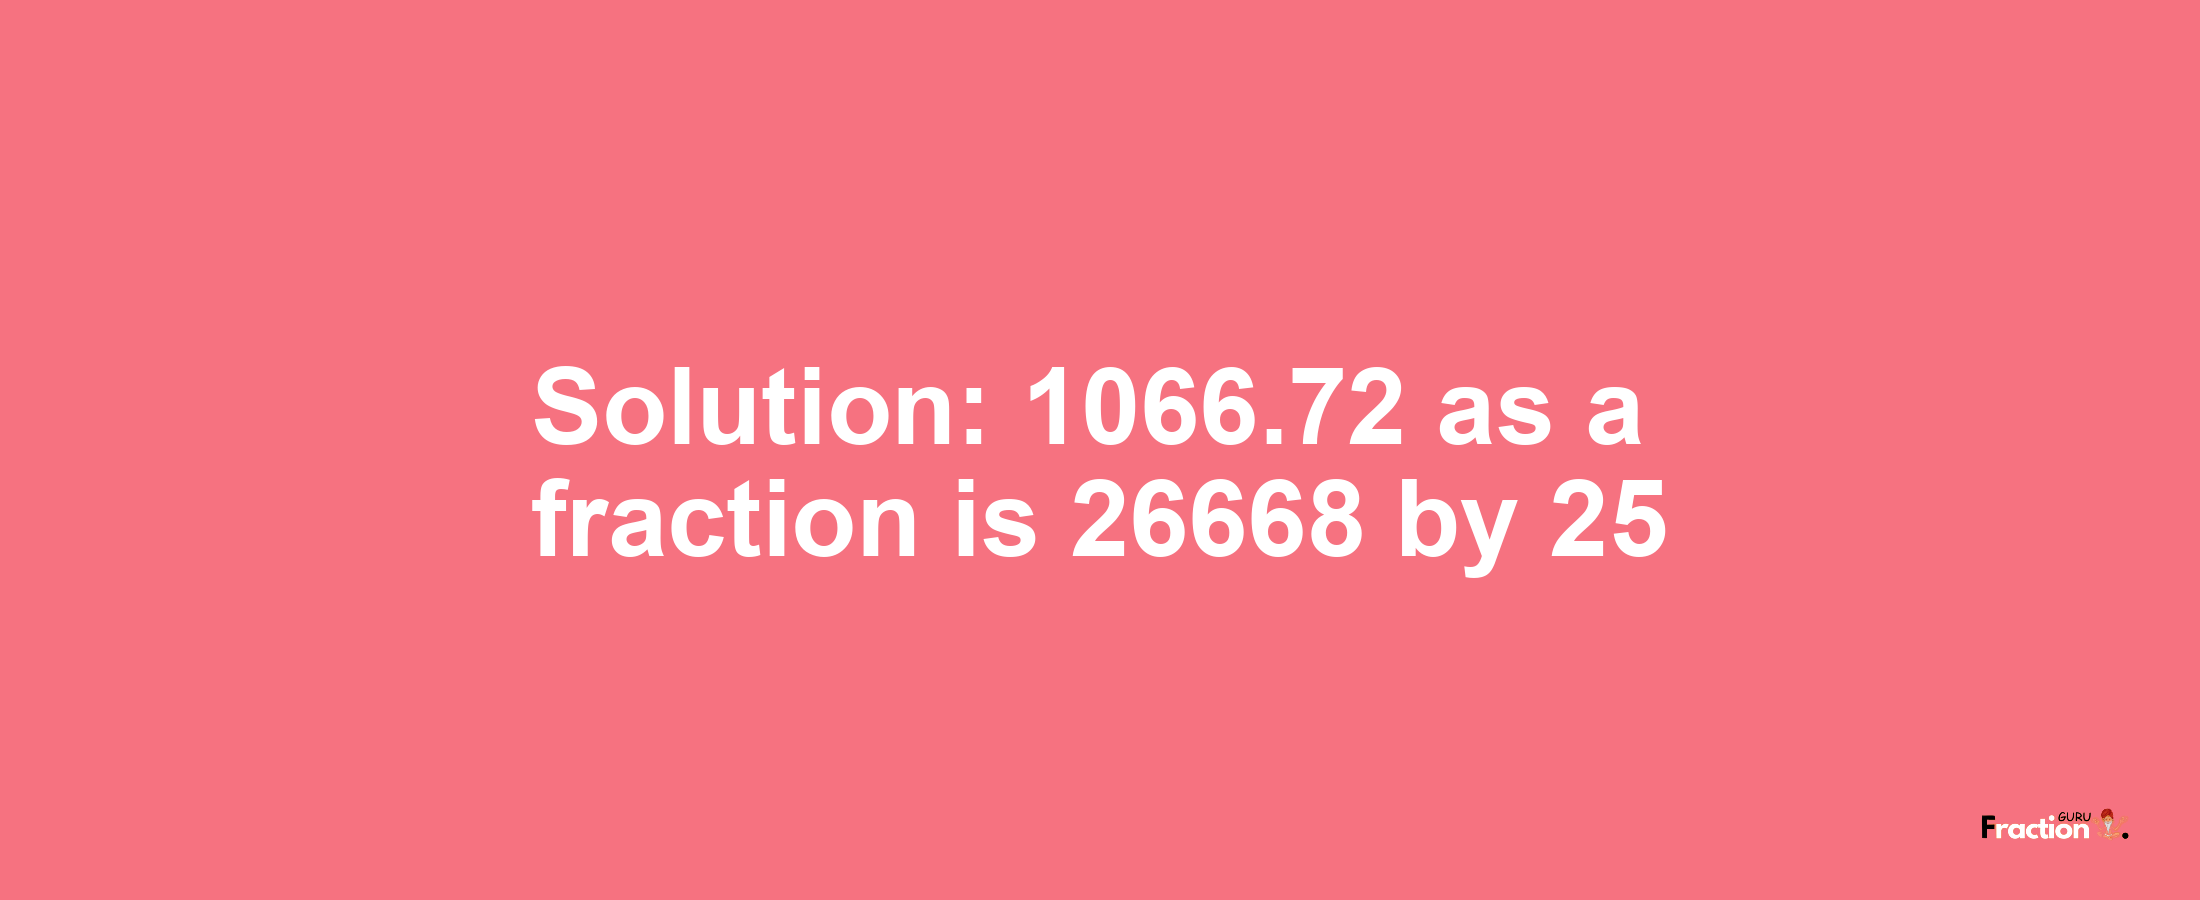 Solution:1066.72 as a fraction is 26668/25